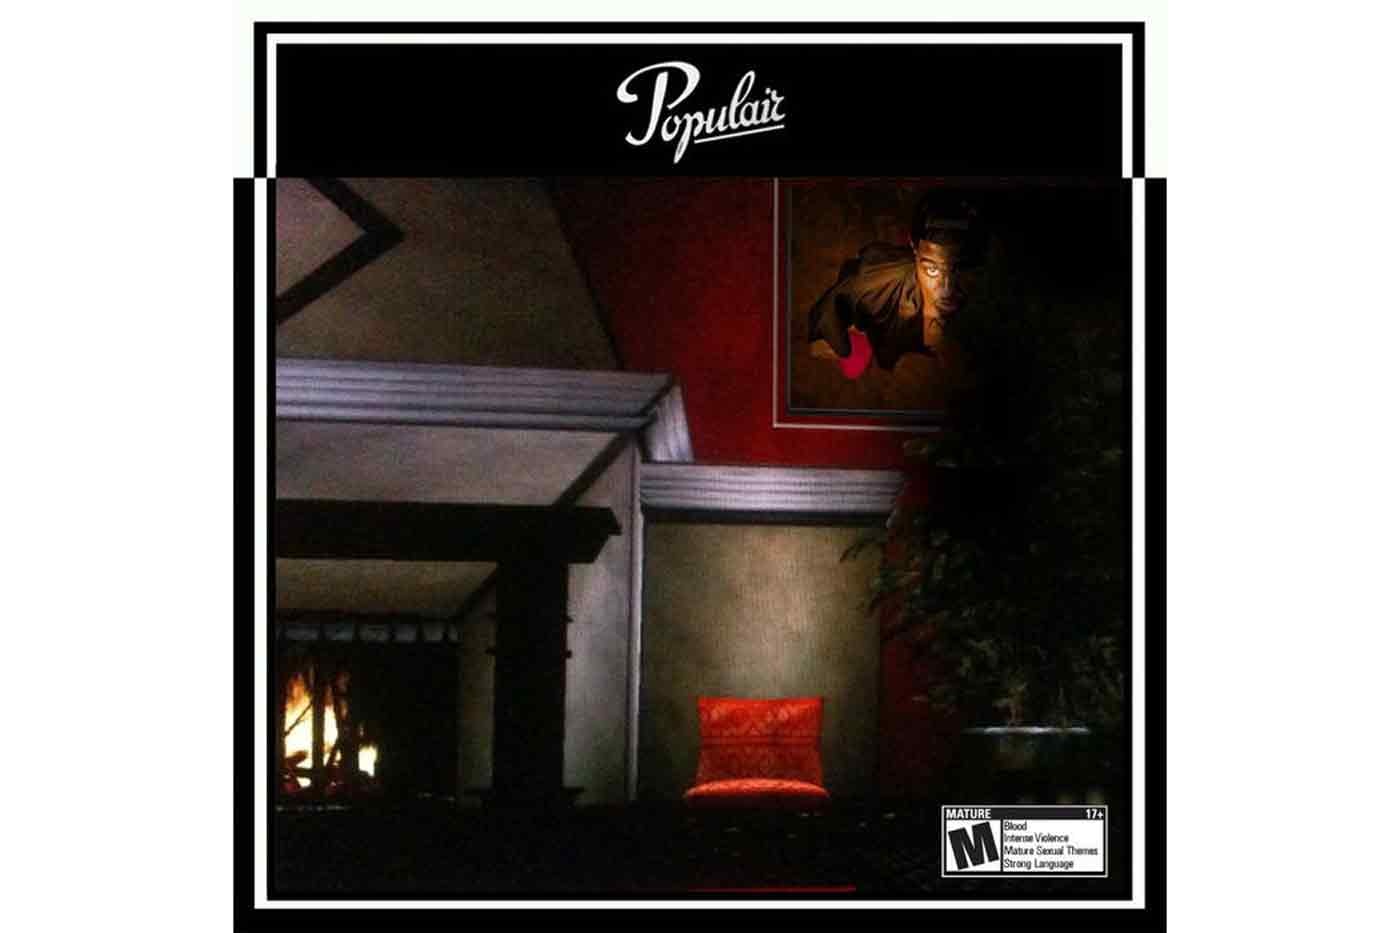 Sir Michael Rocks Formally Introduces 'Populair' with New Single, "Perfect"